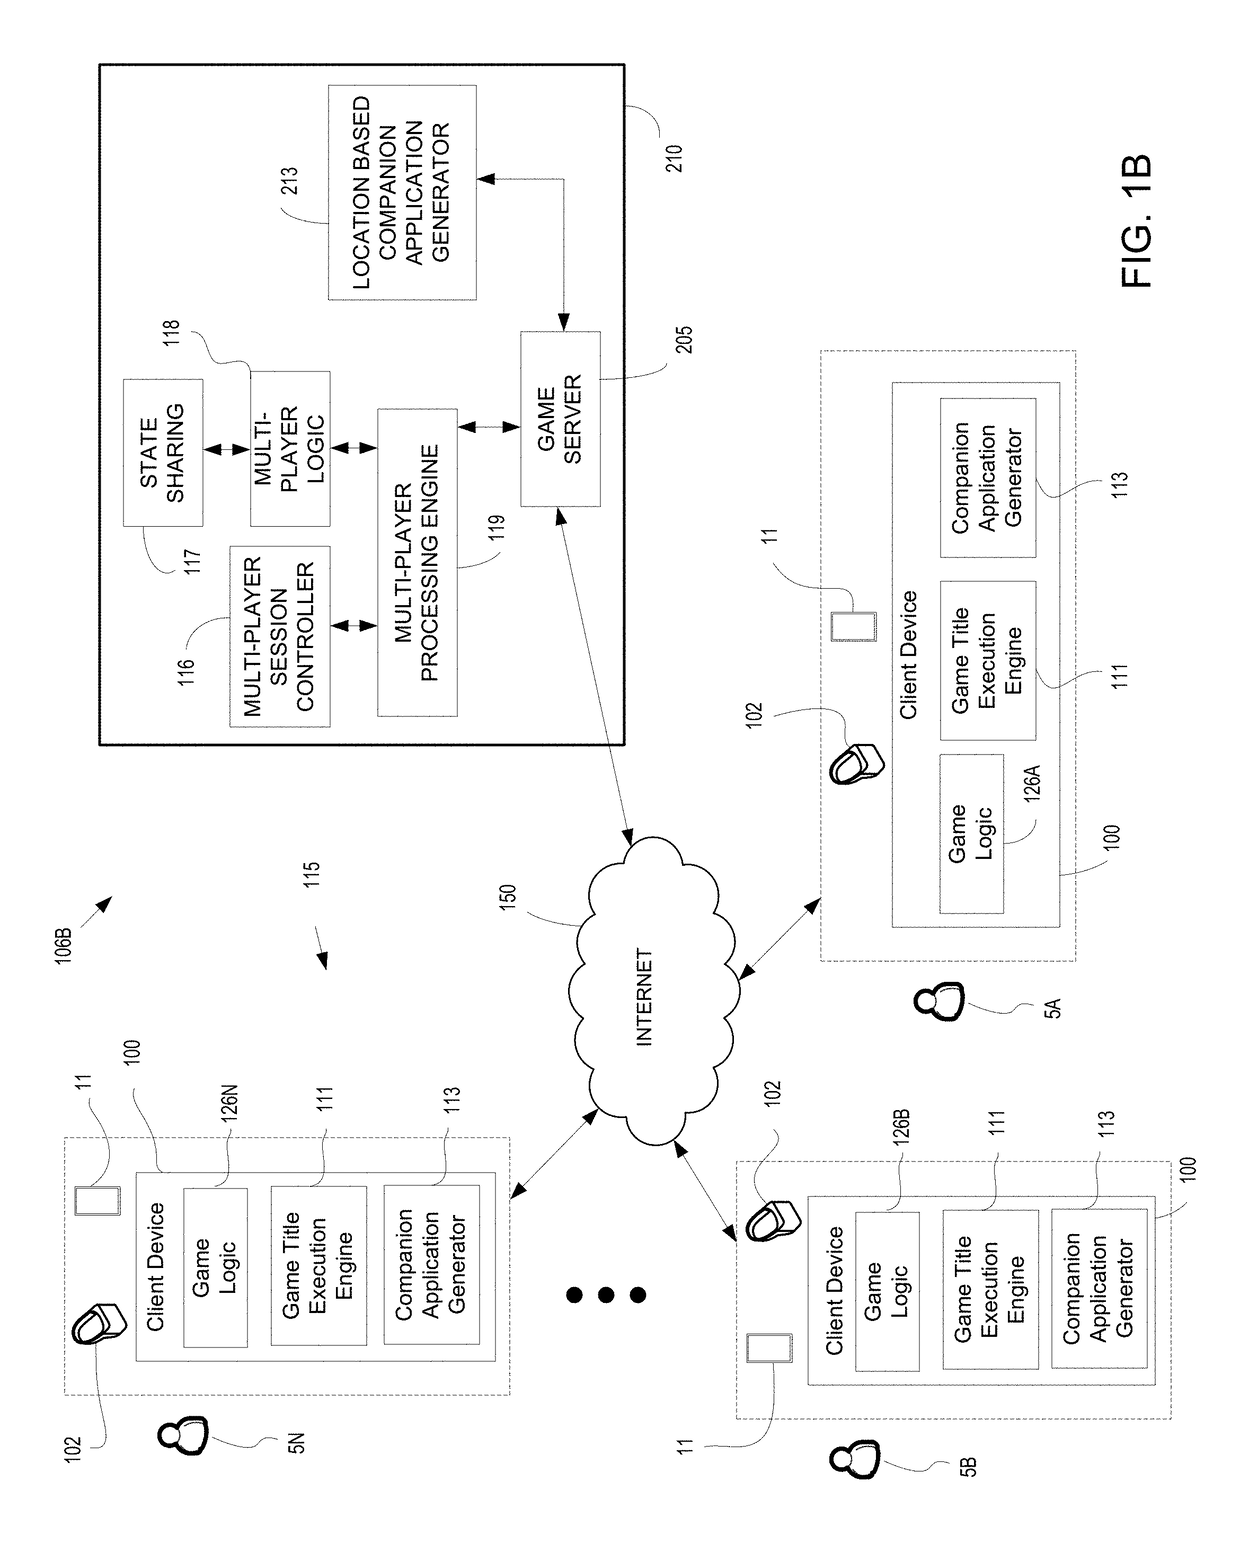 Method and system for directing user attention to a location based game play companion application